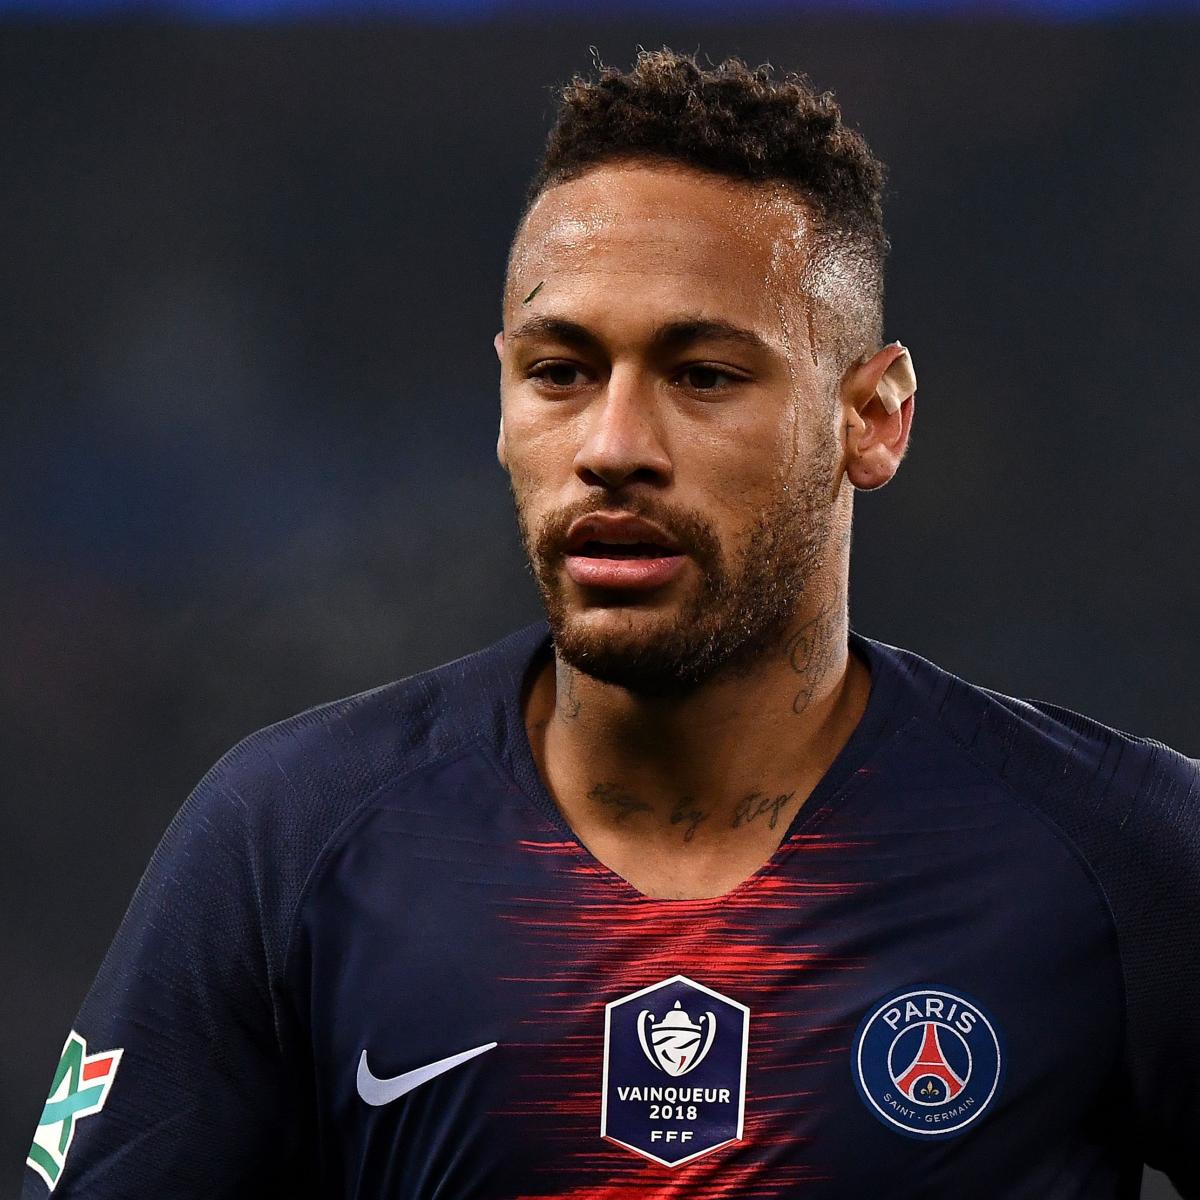 Neymar Says He 'Spent 2 Days at Home Crying' After Latest Foot Injury ...